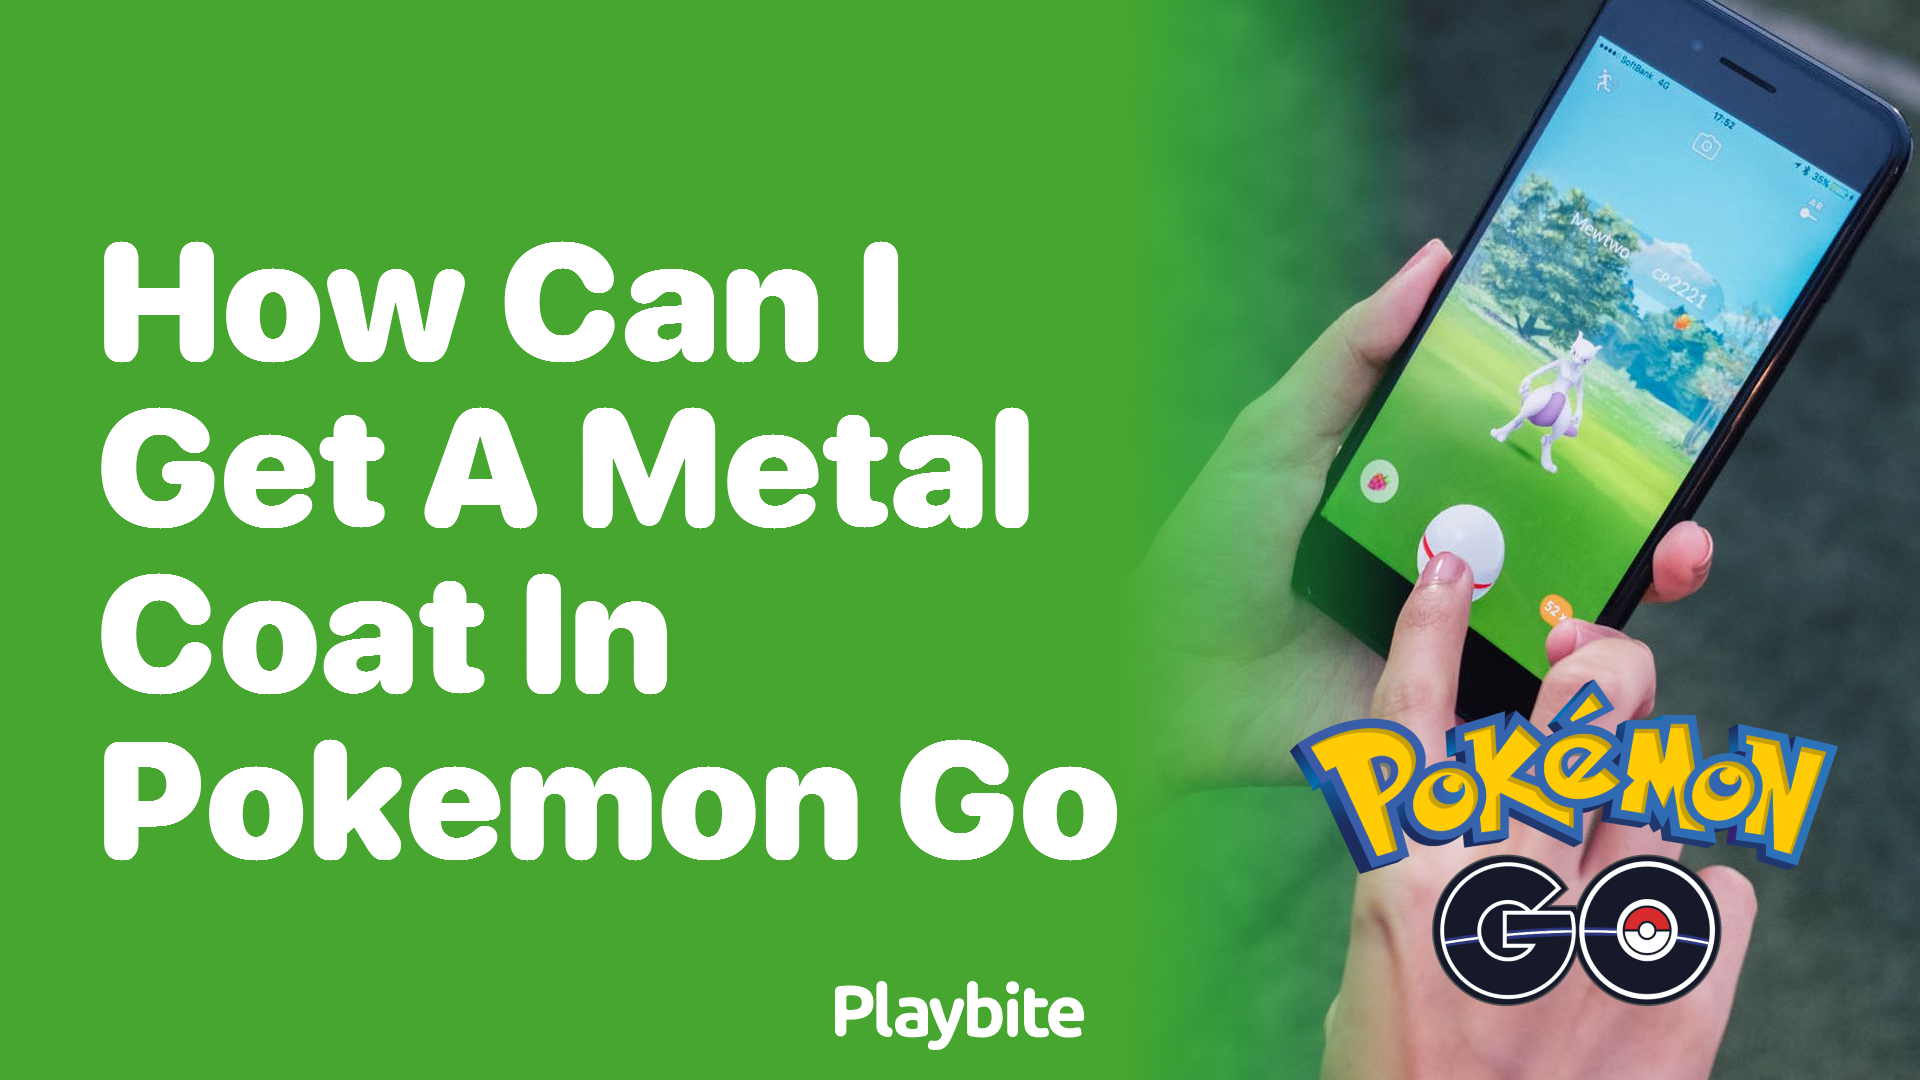 How Can I Get a Metal Coat in Pokemon Go? - Playbite